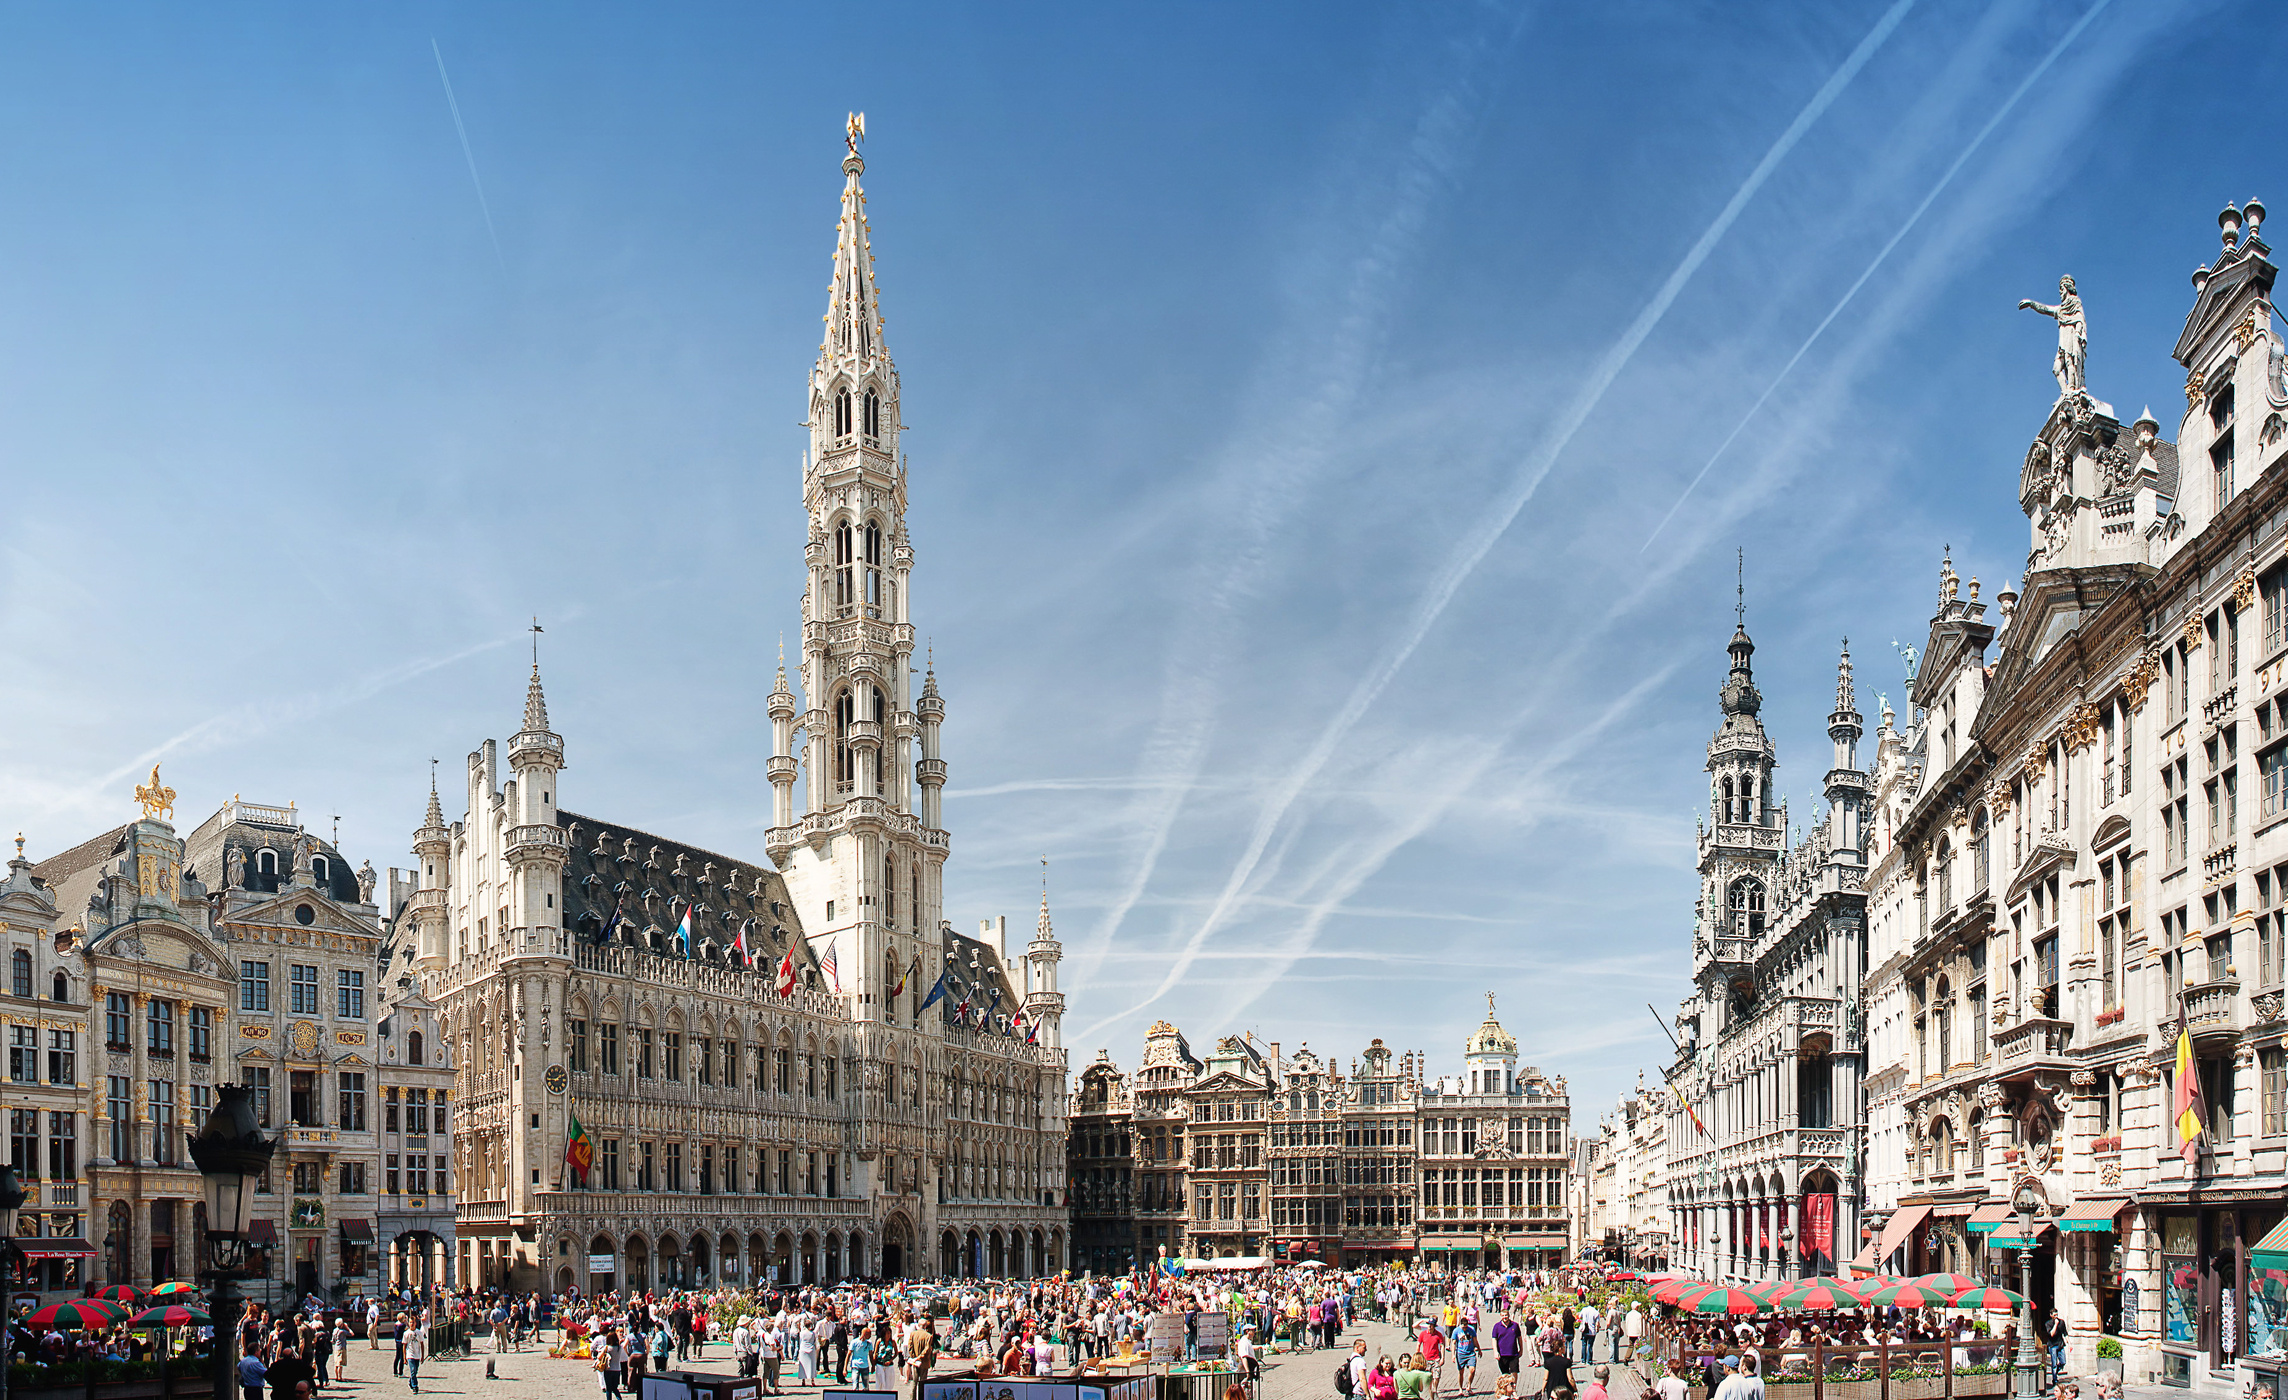 Brussels wallpapers man made, HQ Brussels pictures, 2290x1400 HD Desktop